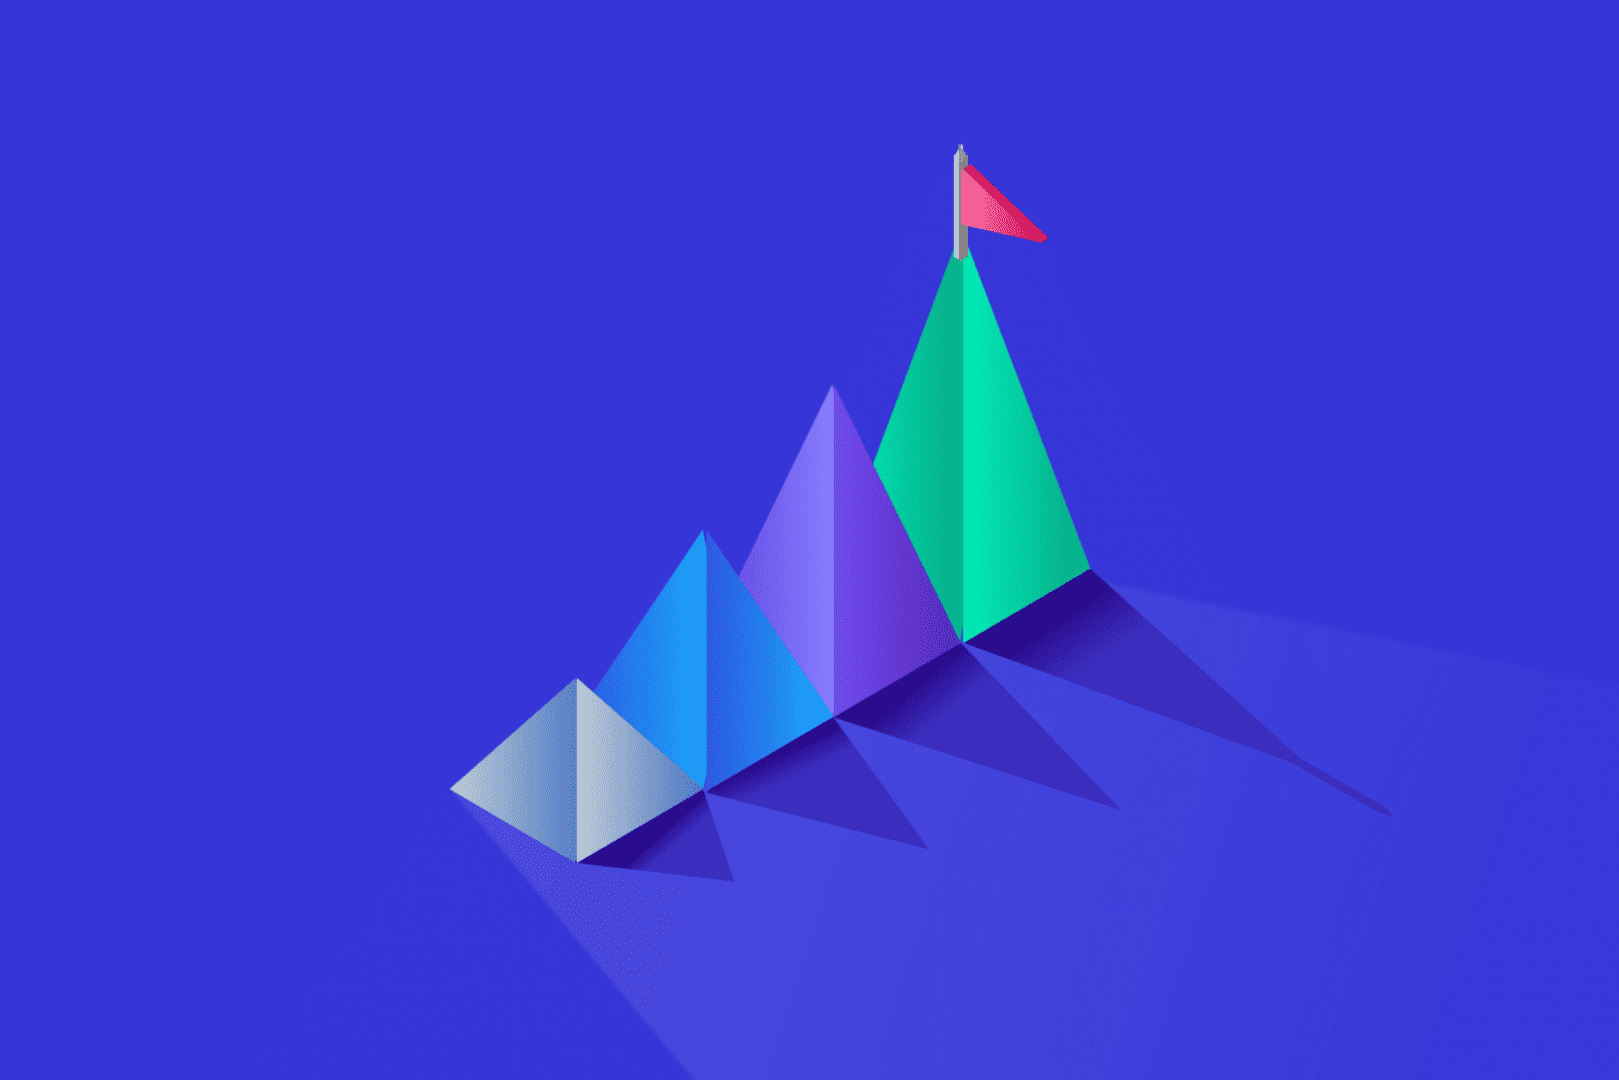 Graphic with four pyramids